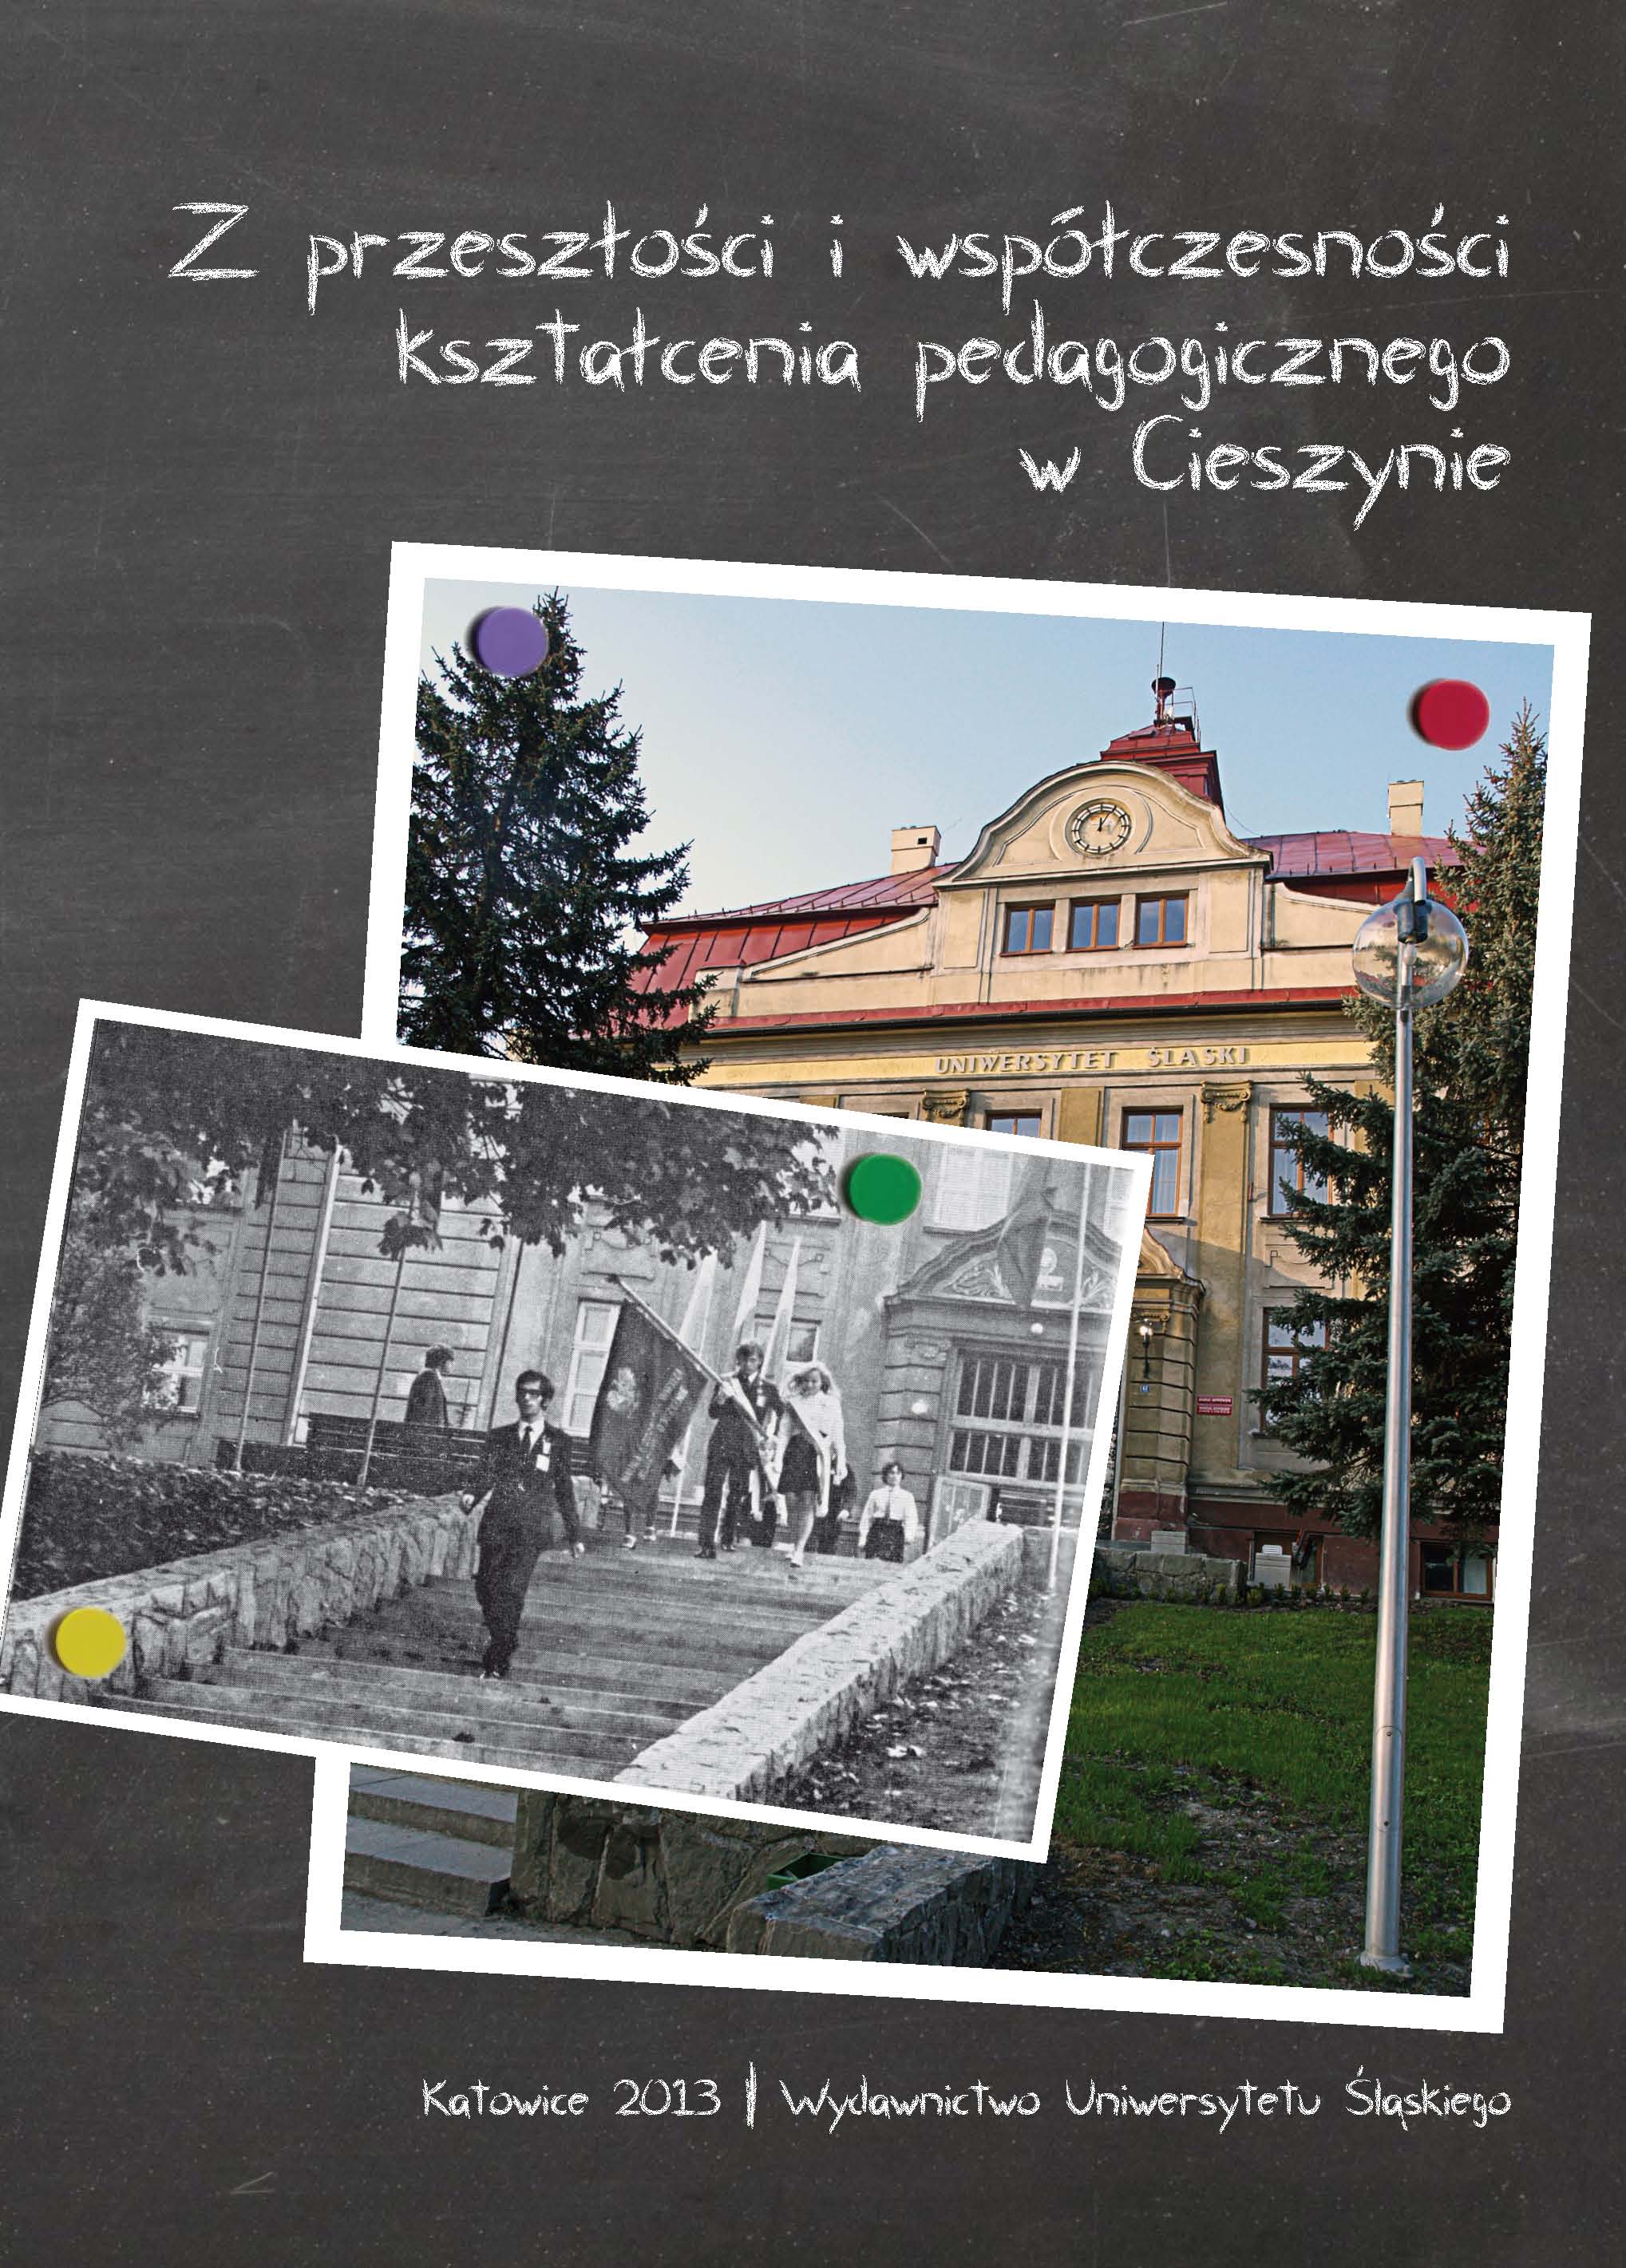 From the past and present of pedagogical education in Cieszyn